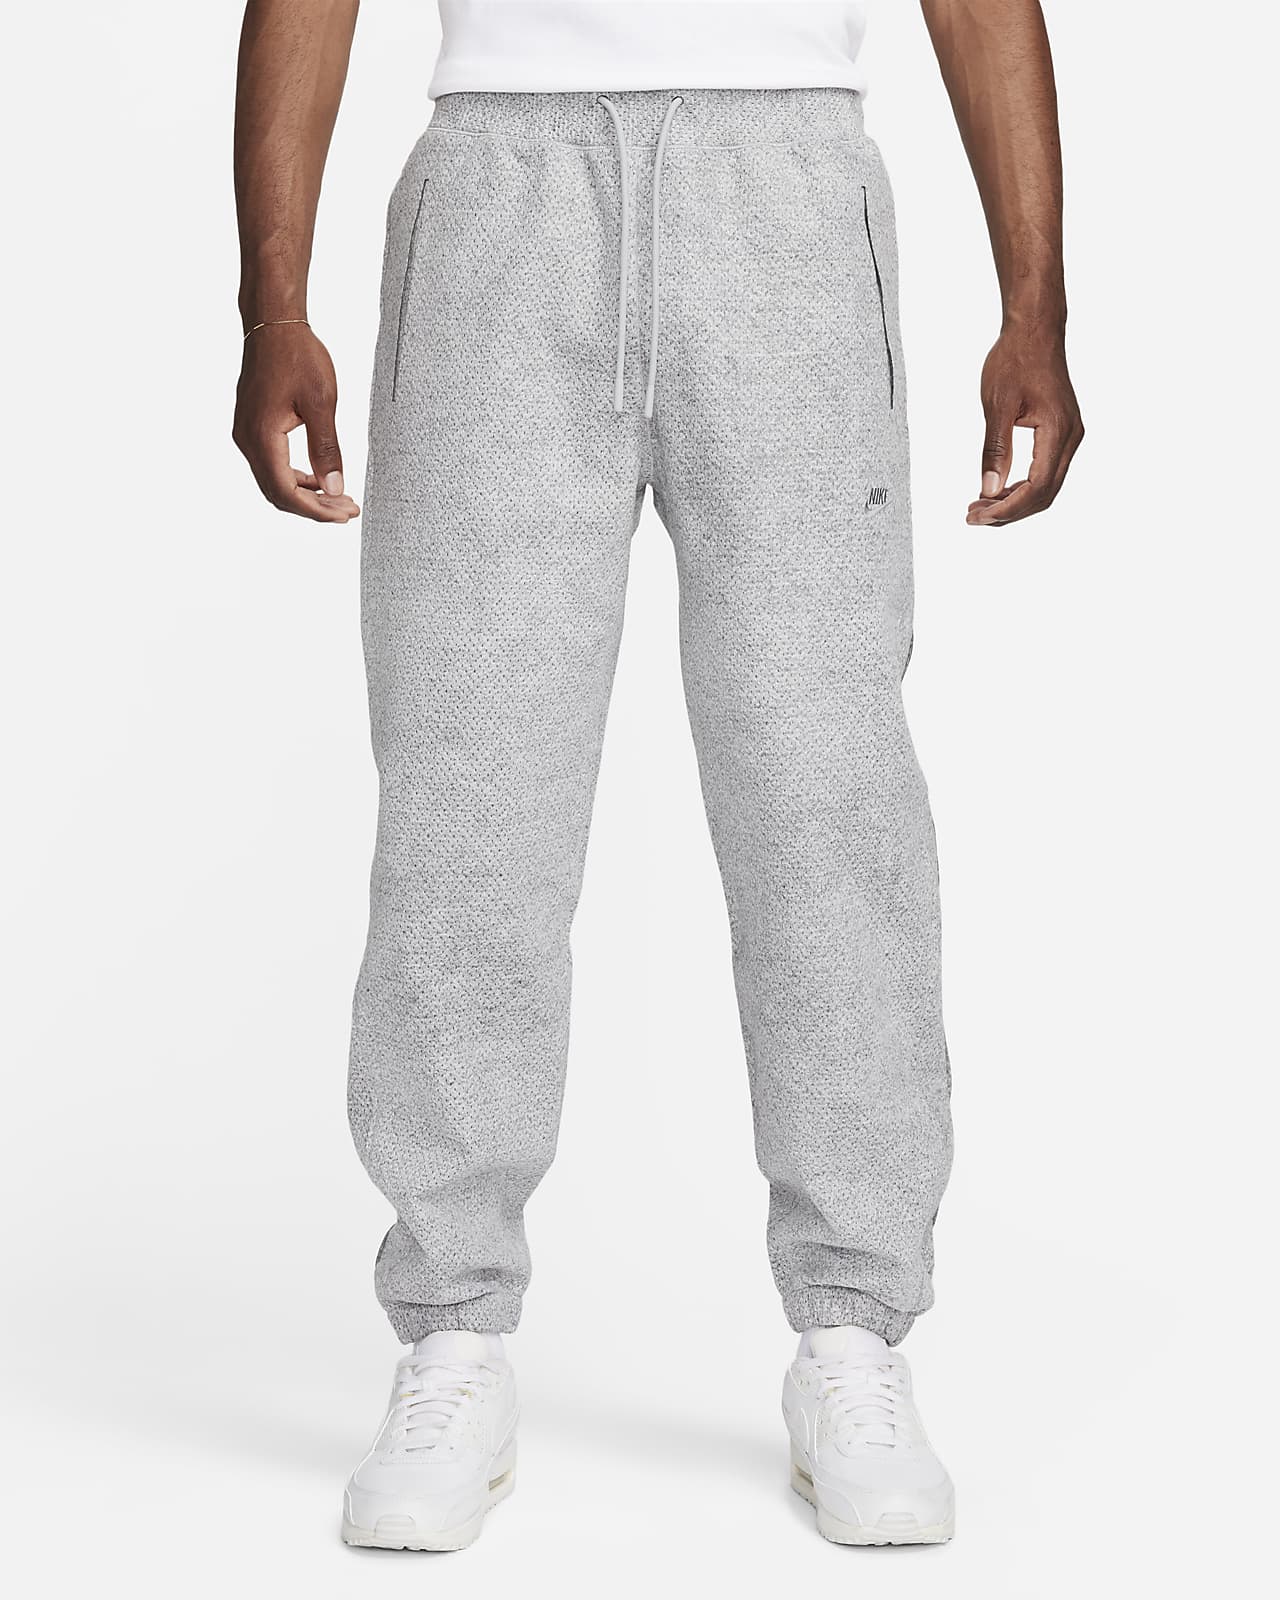 Nike Forward Trousers Men's Therma-FIT ADV Trousers